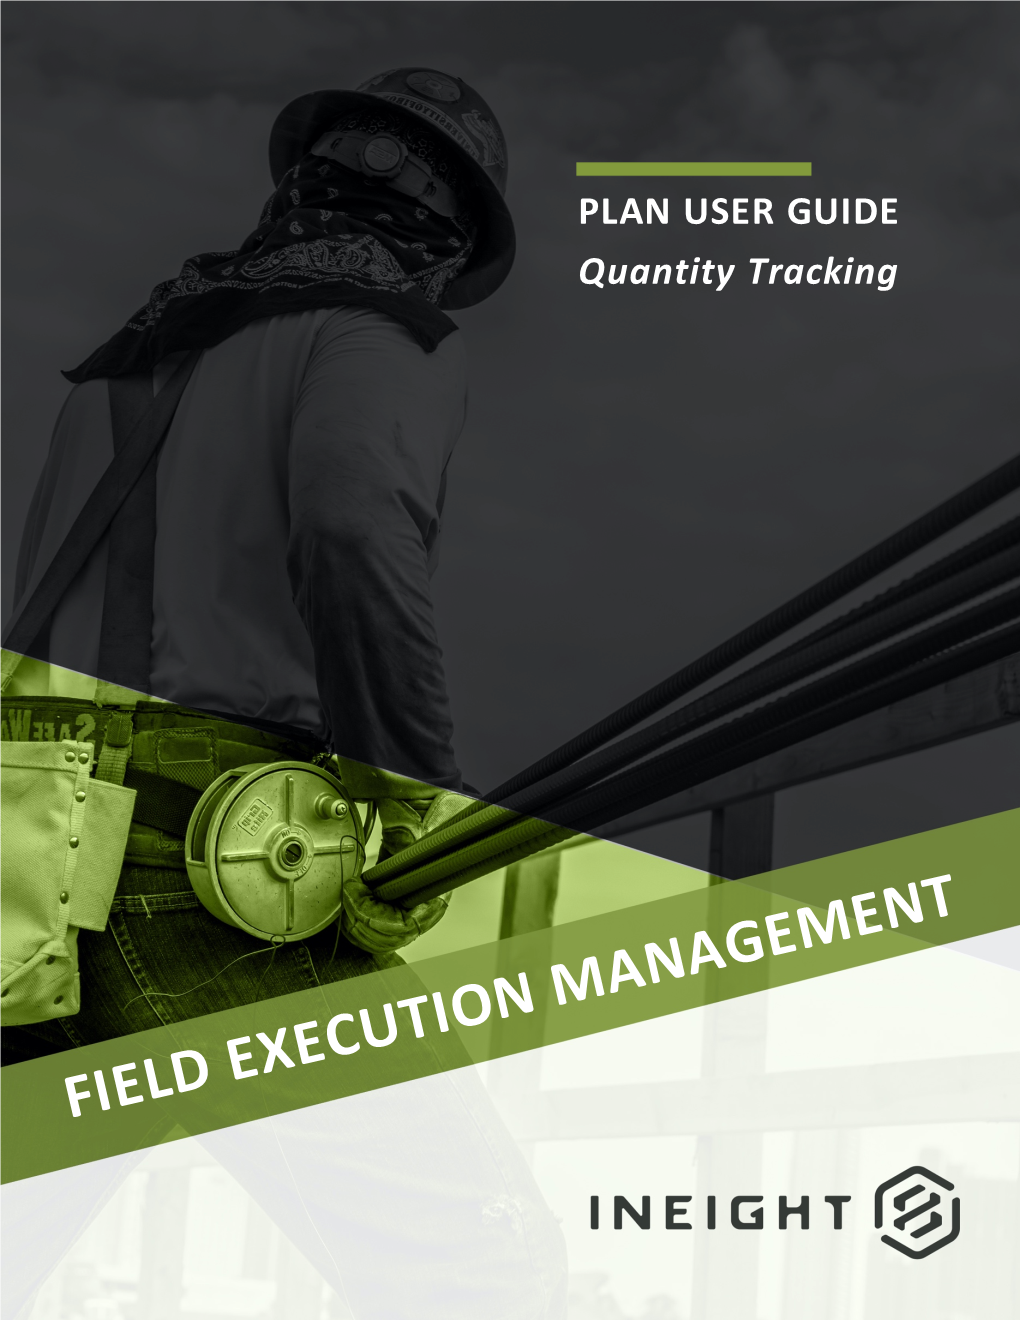 PLAN USER GUIDE Quantity Tracking